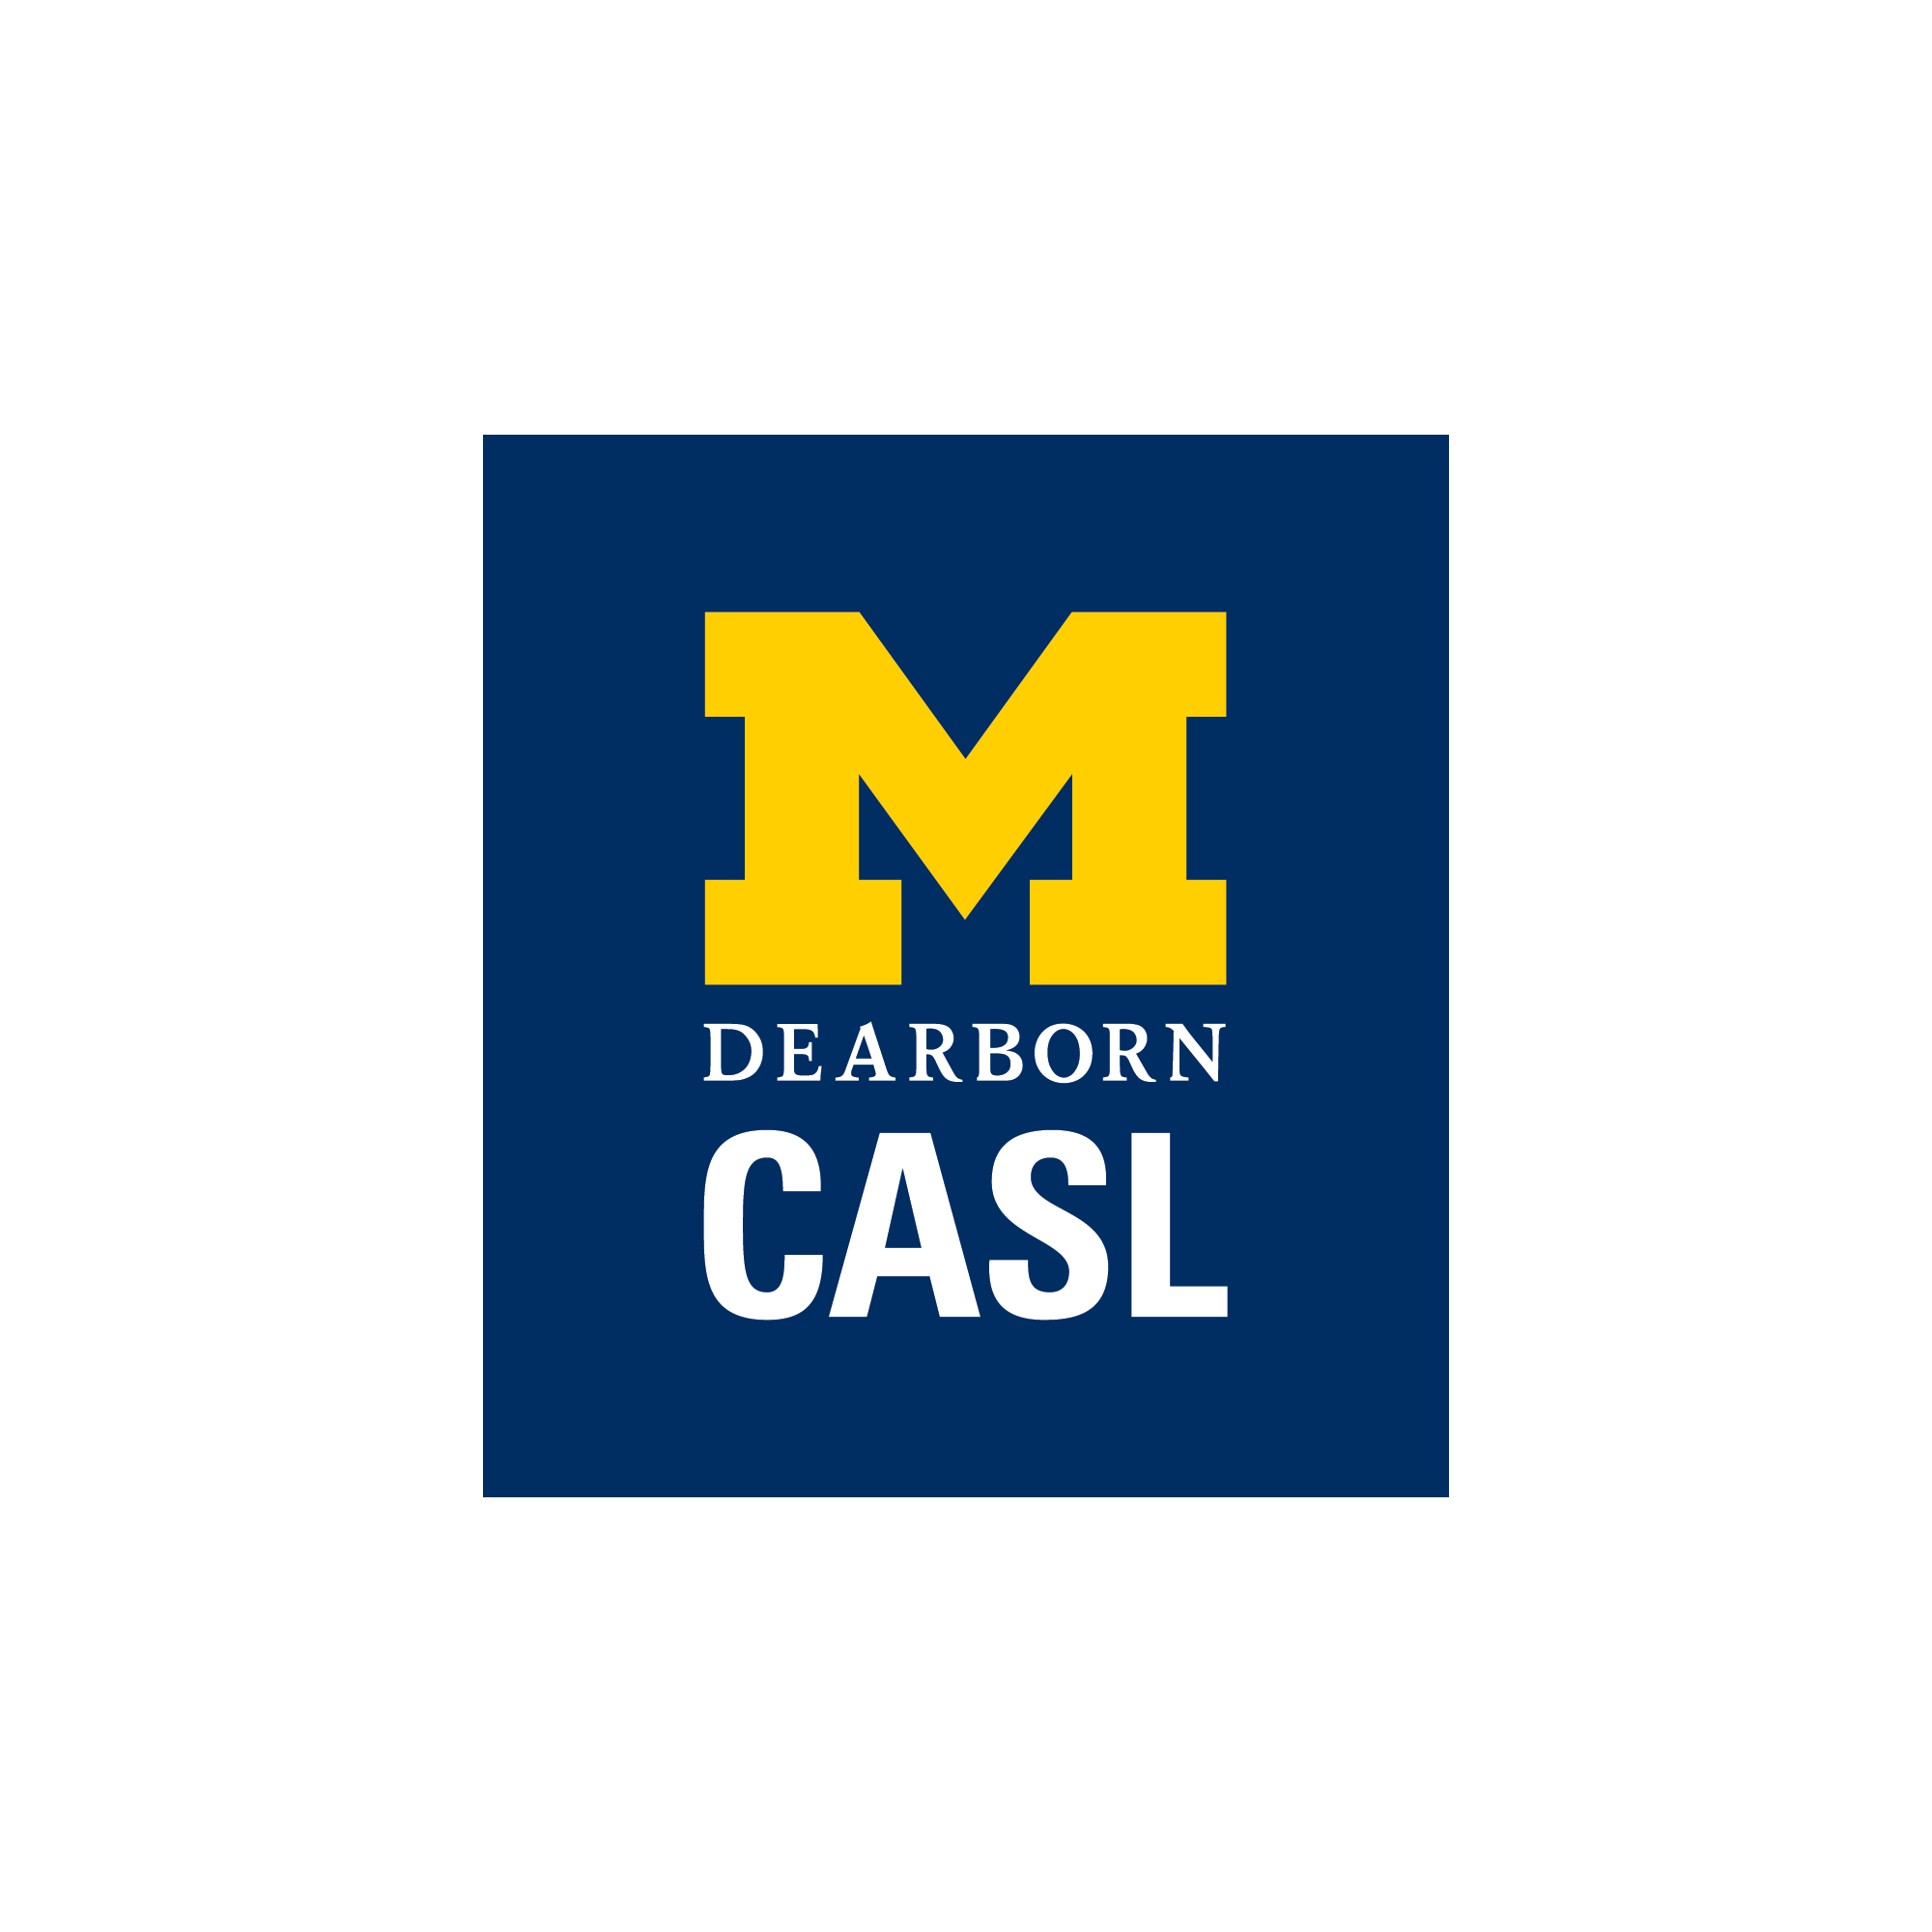 A maize yellow varsity-style letter M on a navy blue background. Underneath the M is "Dearborn" and "CASL" in all capital, white lettering.